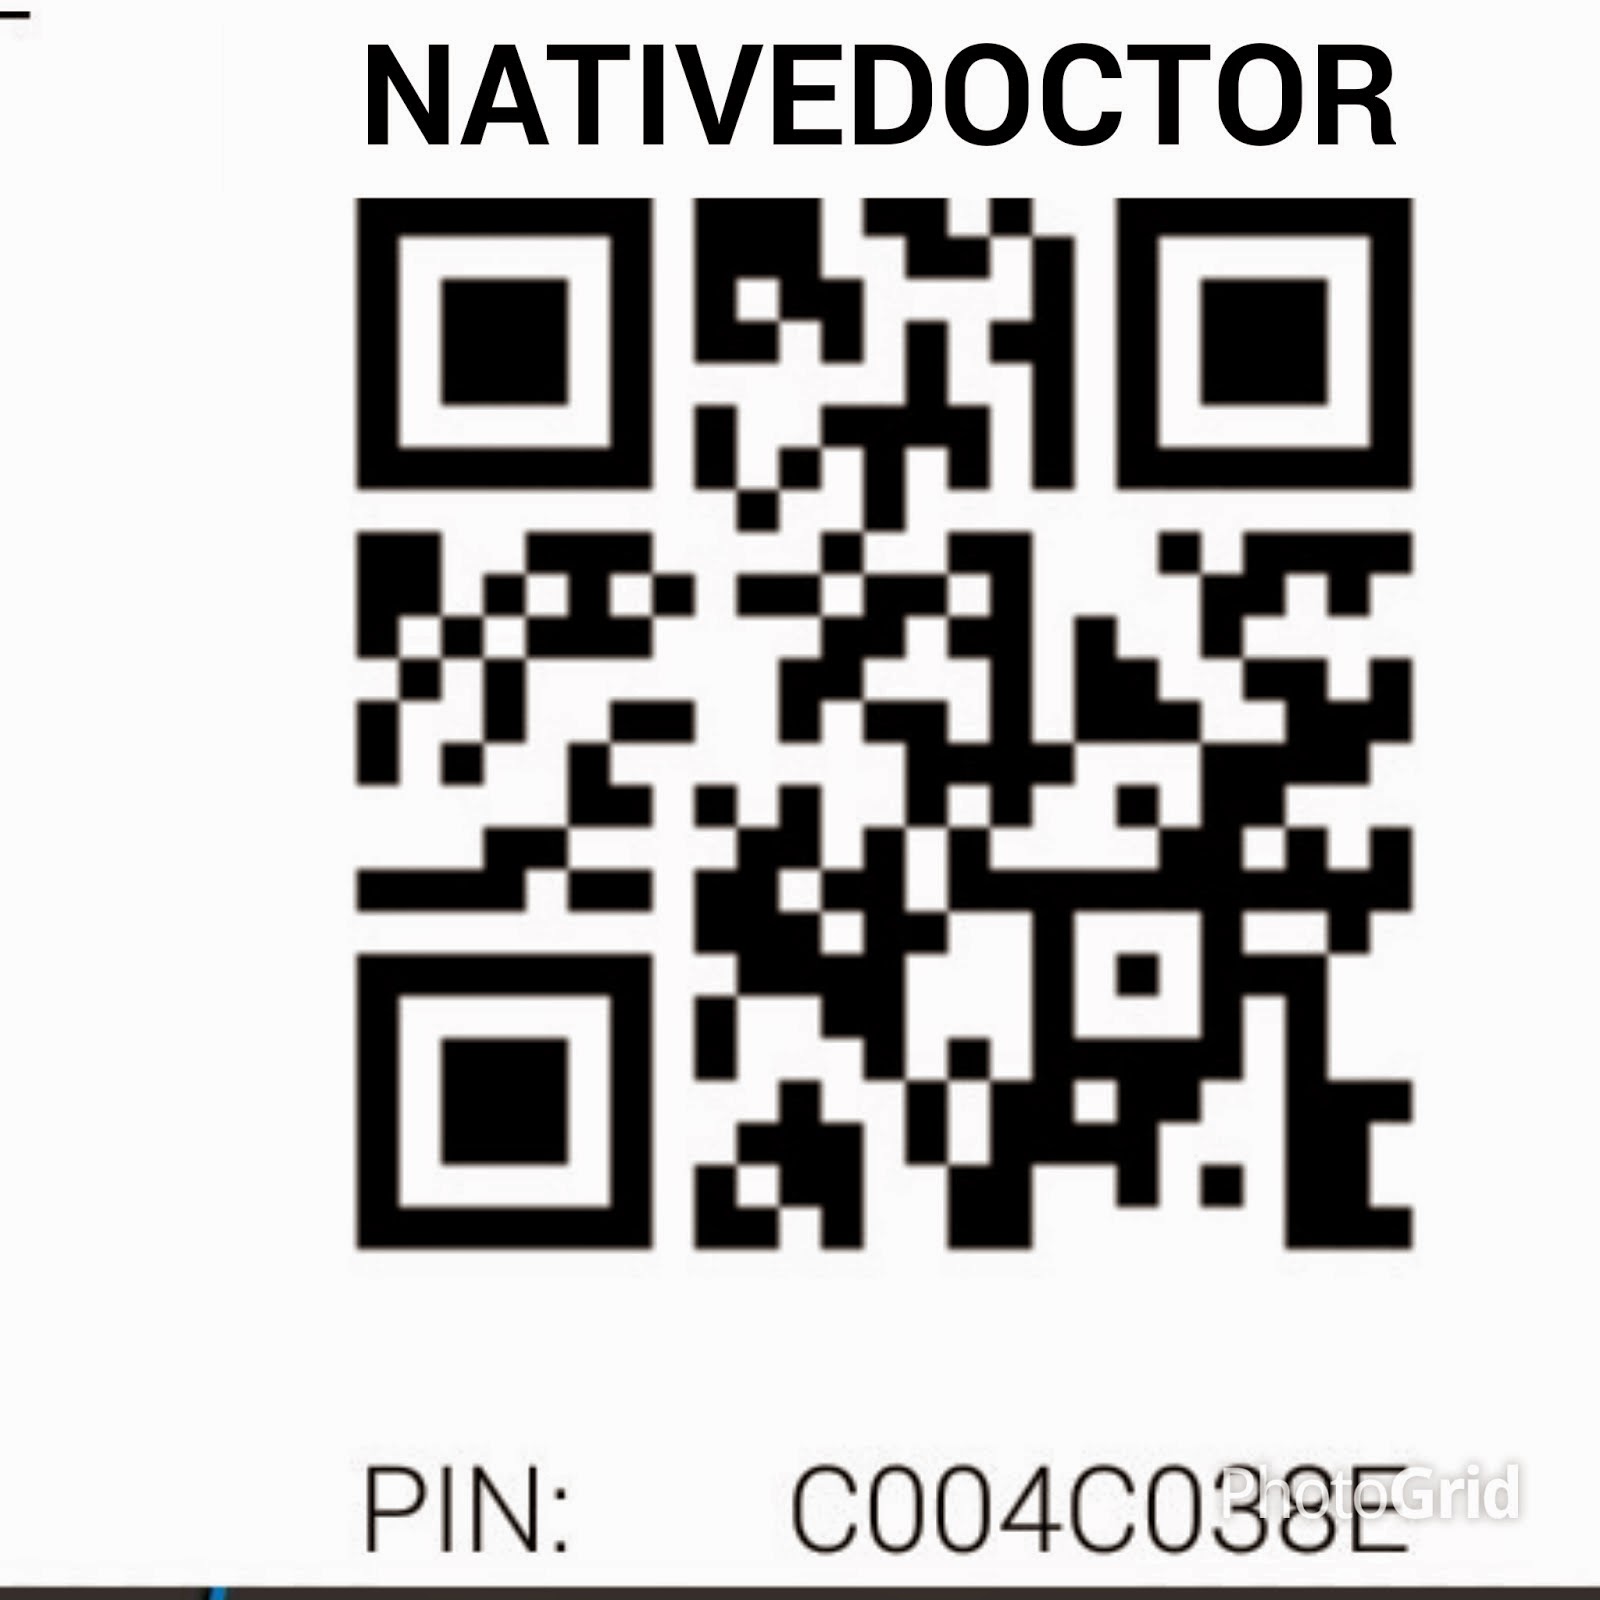 FOLLOW NATIVEDOCTORS' BB CHANNEL